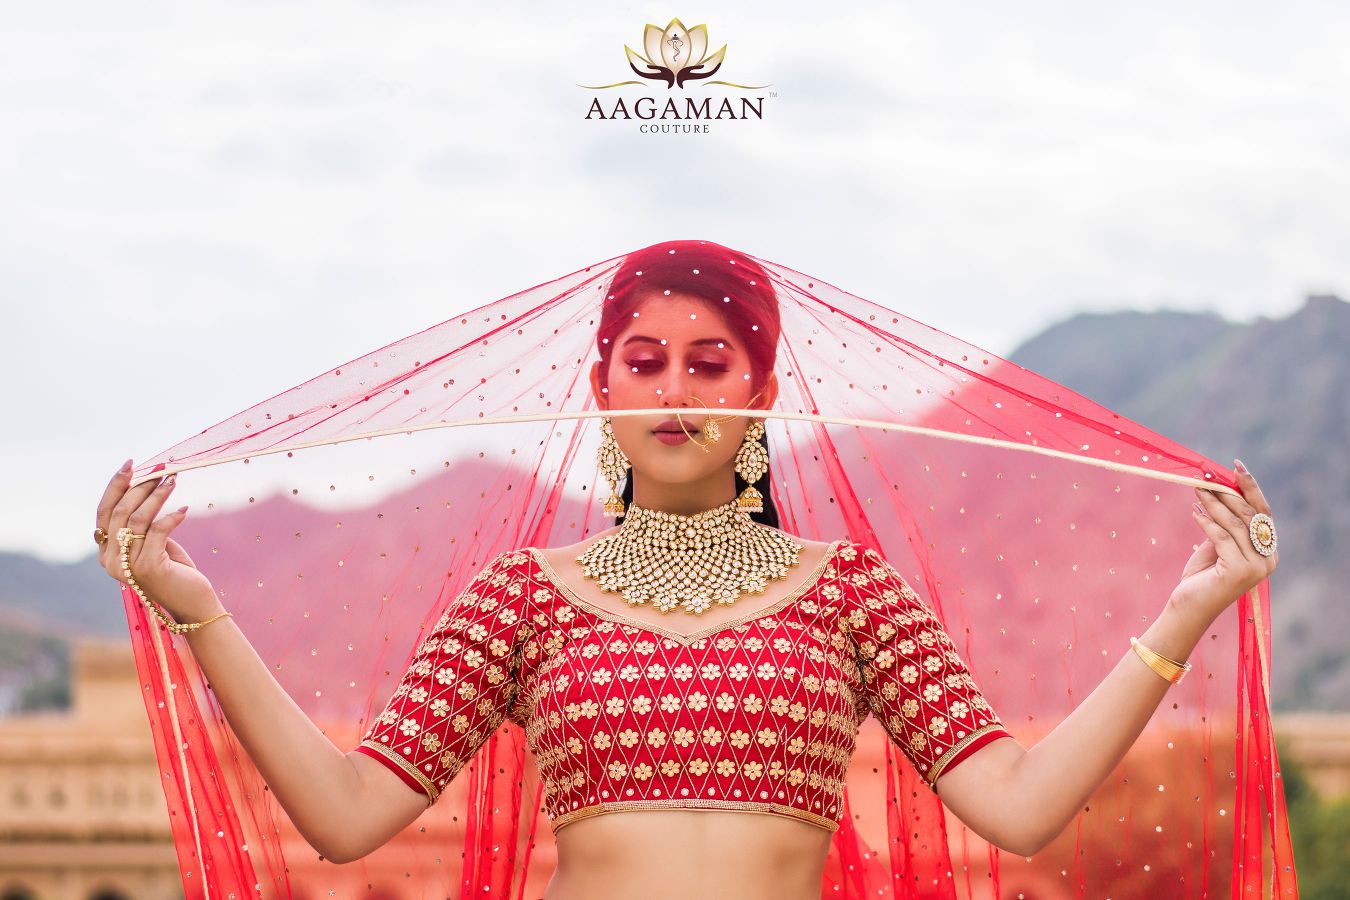 Exquisite Bridal Ghagra Choli In Bold Red with Striking Metallic Gold & Handcrafted Chikan Embroidery